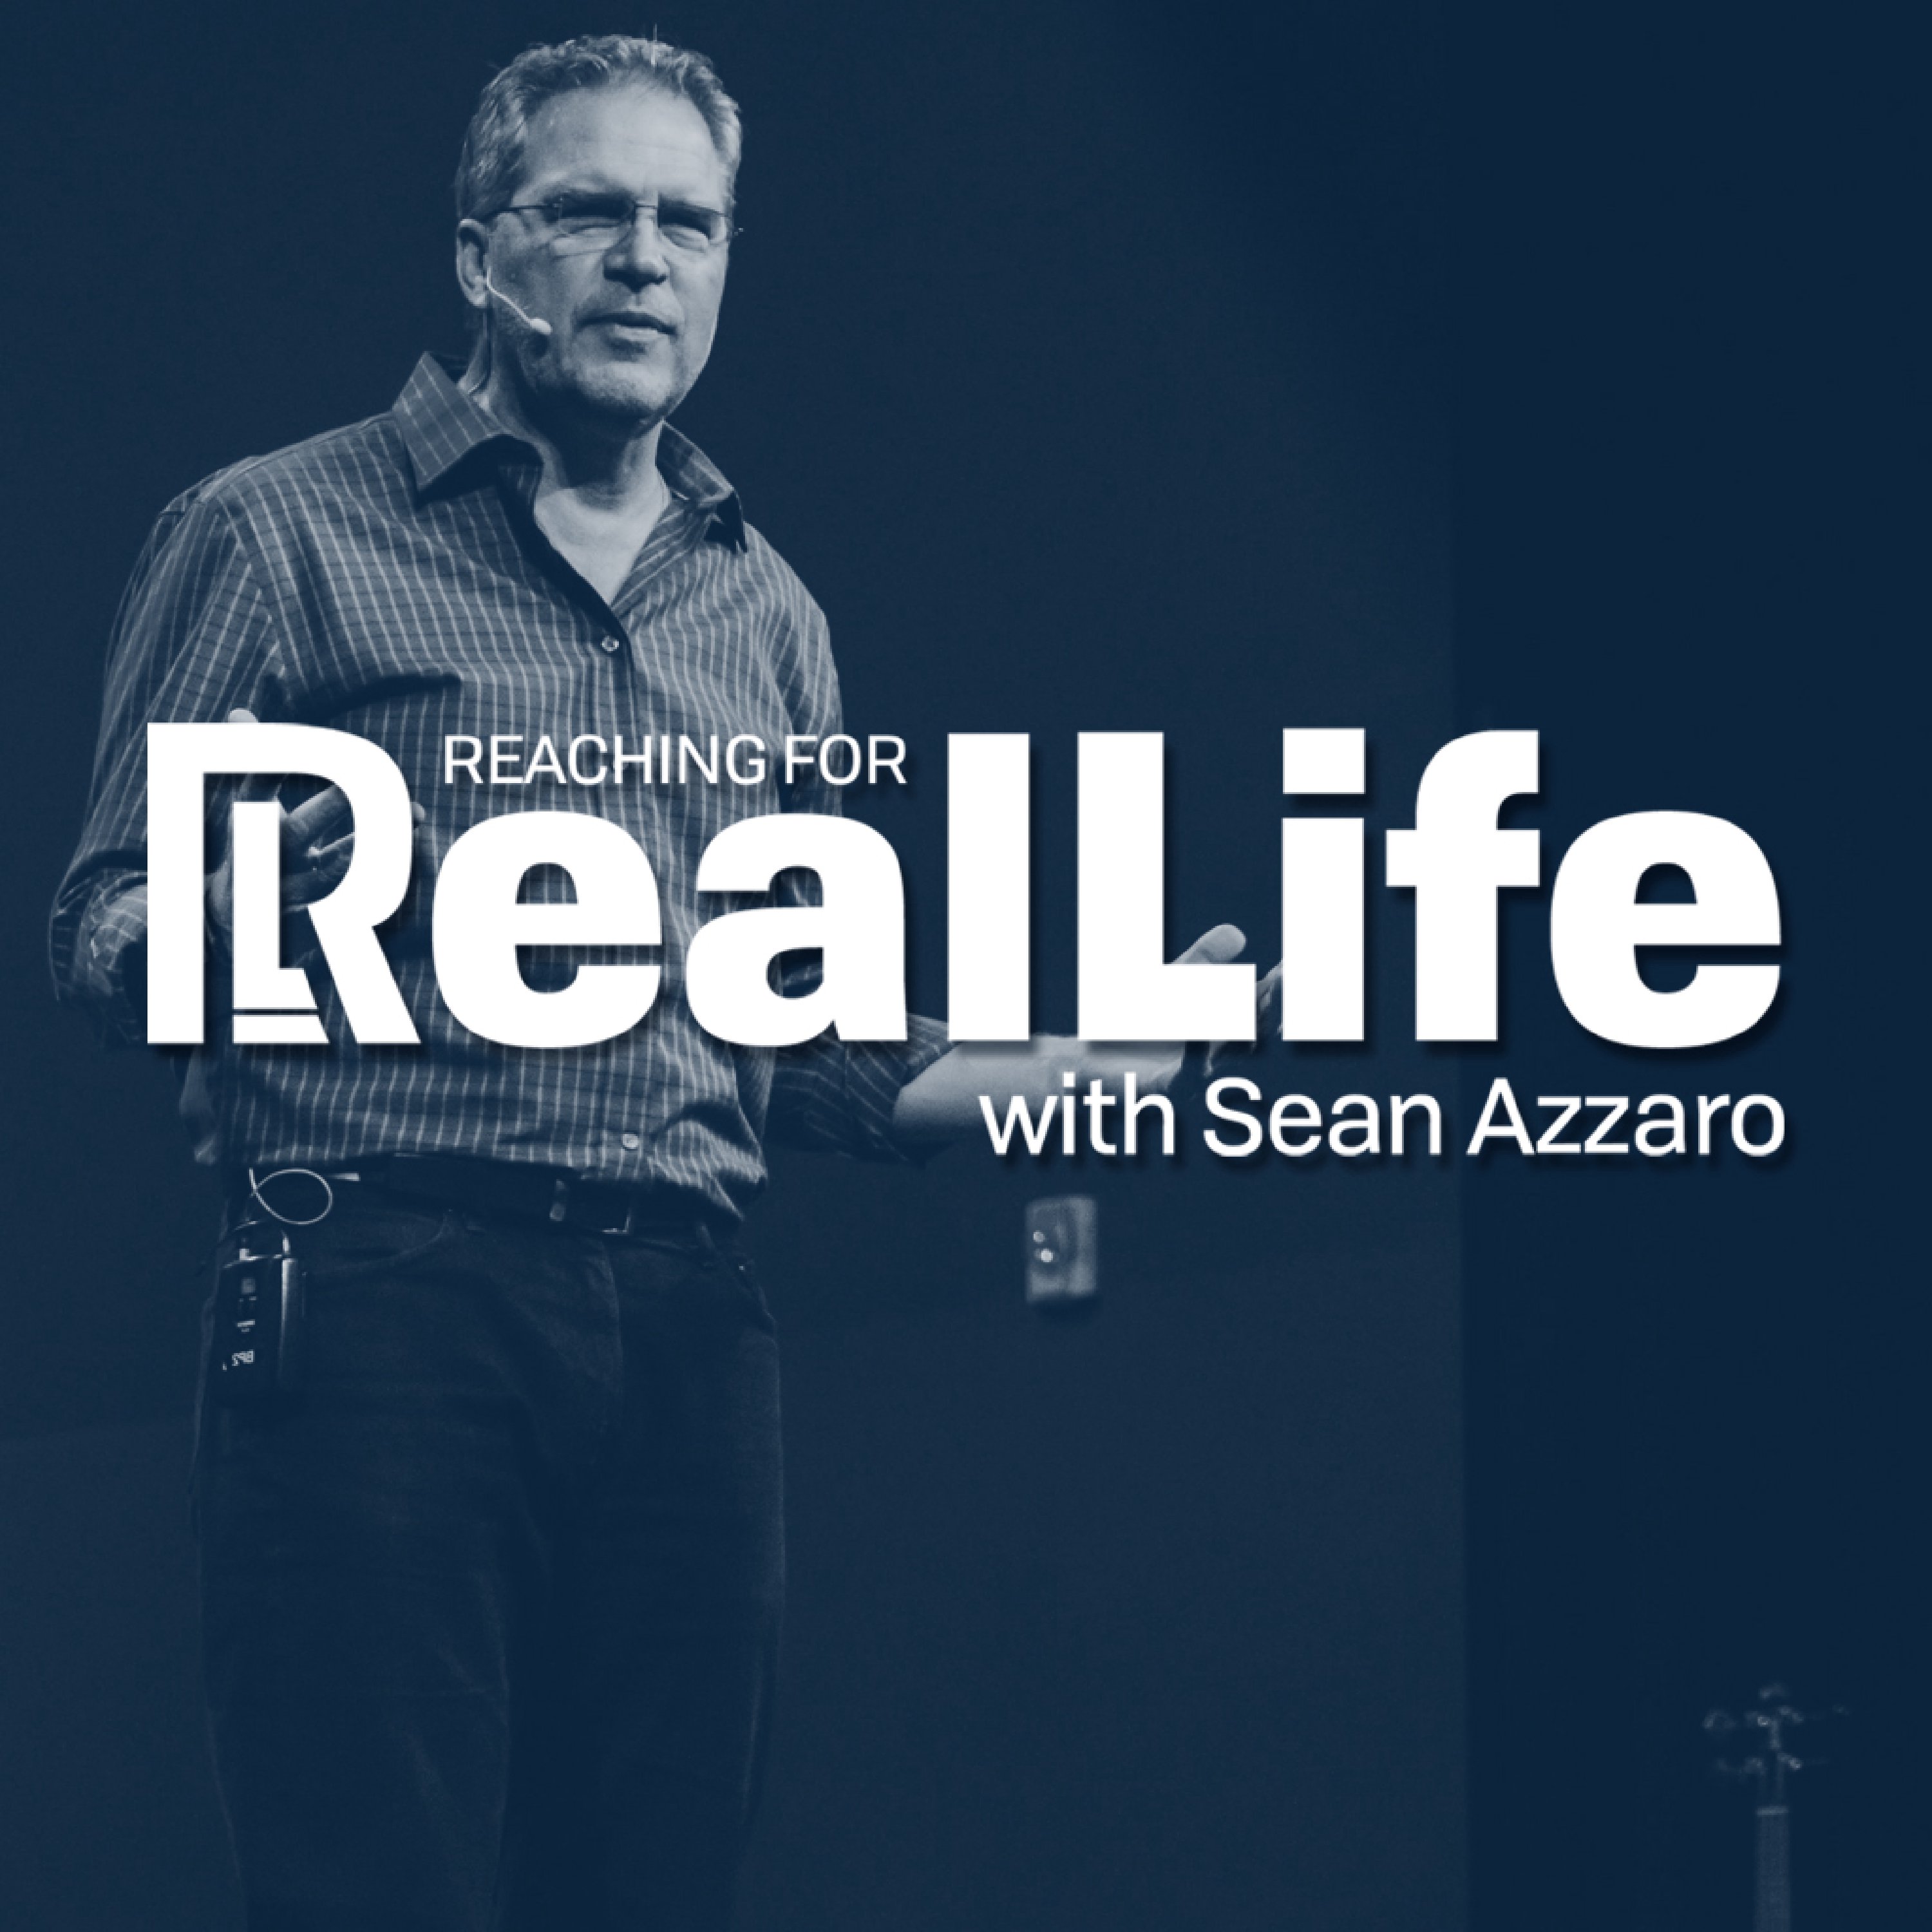 Reaching For Real Life with Sean Azzaro